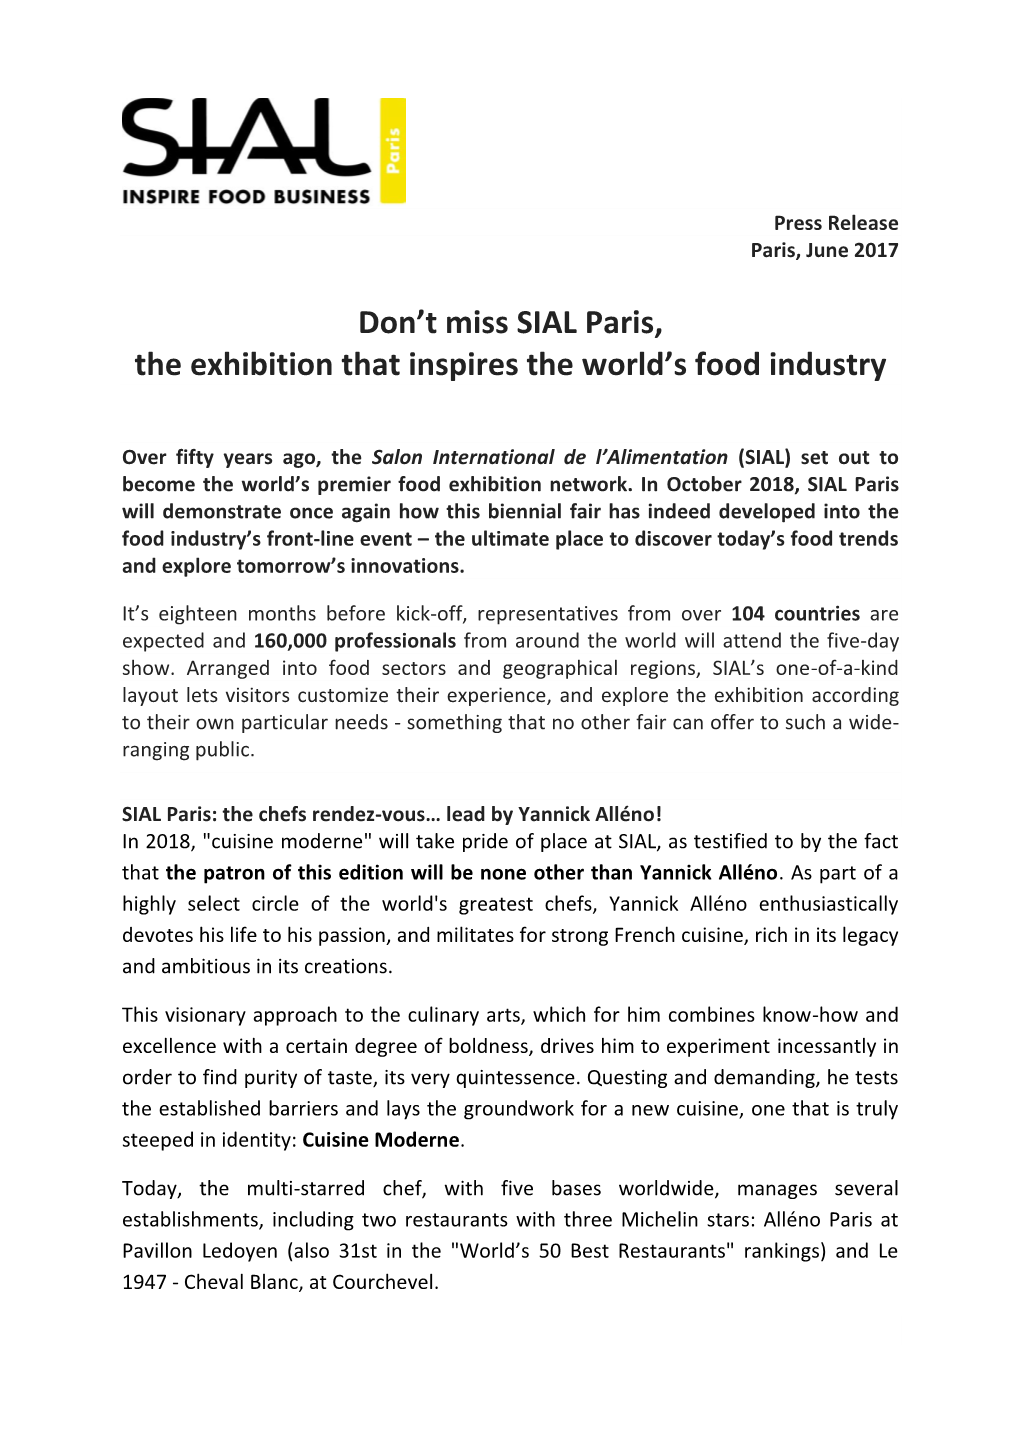 Don't Miss SIAL Paris, the Exhibition That Inspires the World's Food Industry